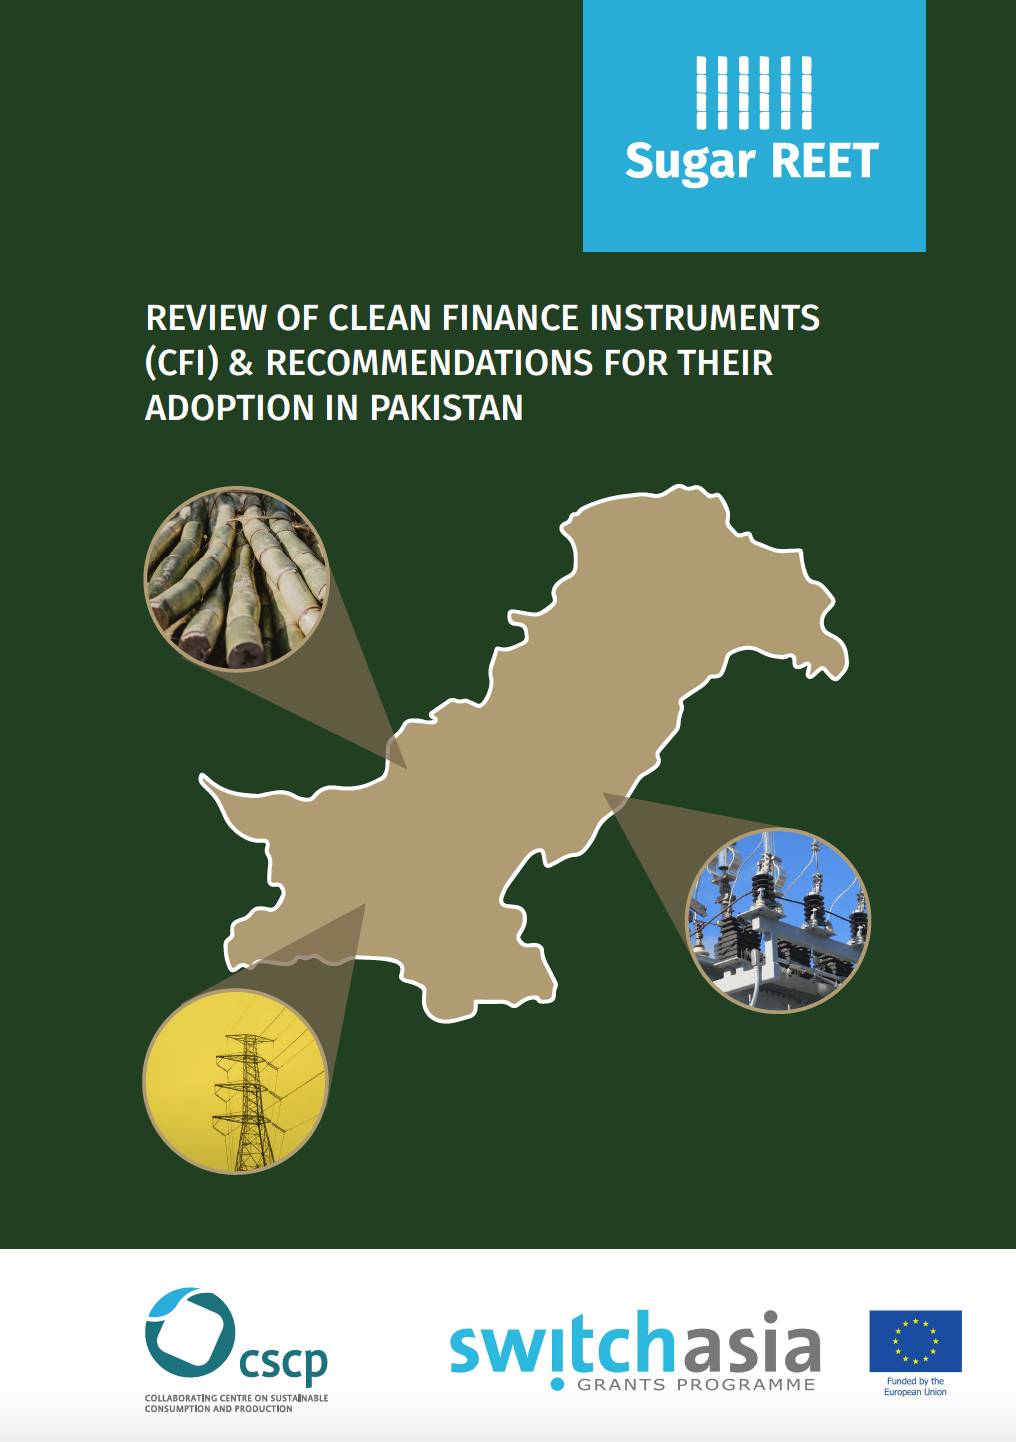 Review of Clean Finance Instruments (CFI) & Recommendations for the Adoption in Pakistan